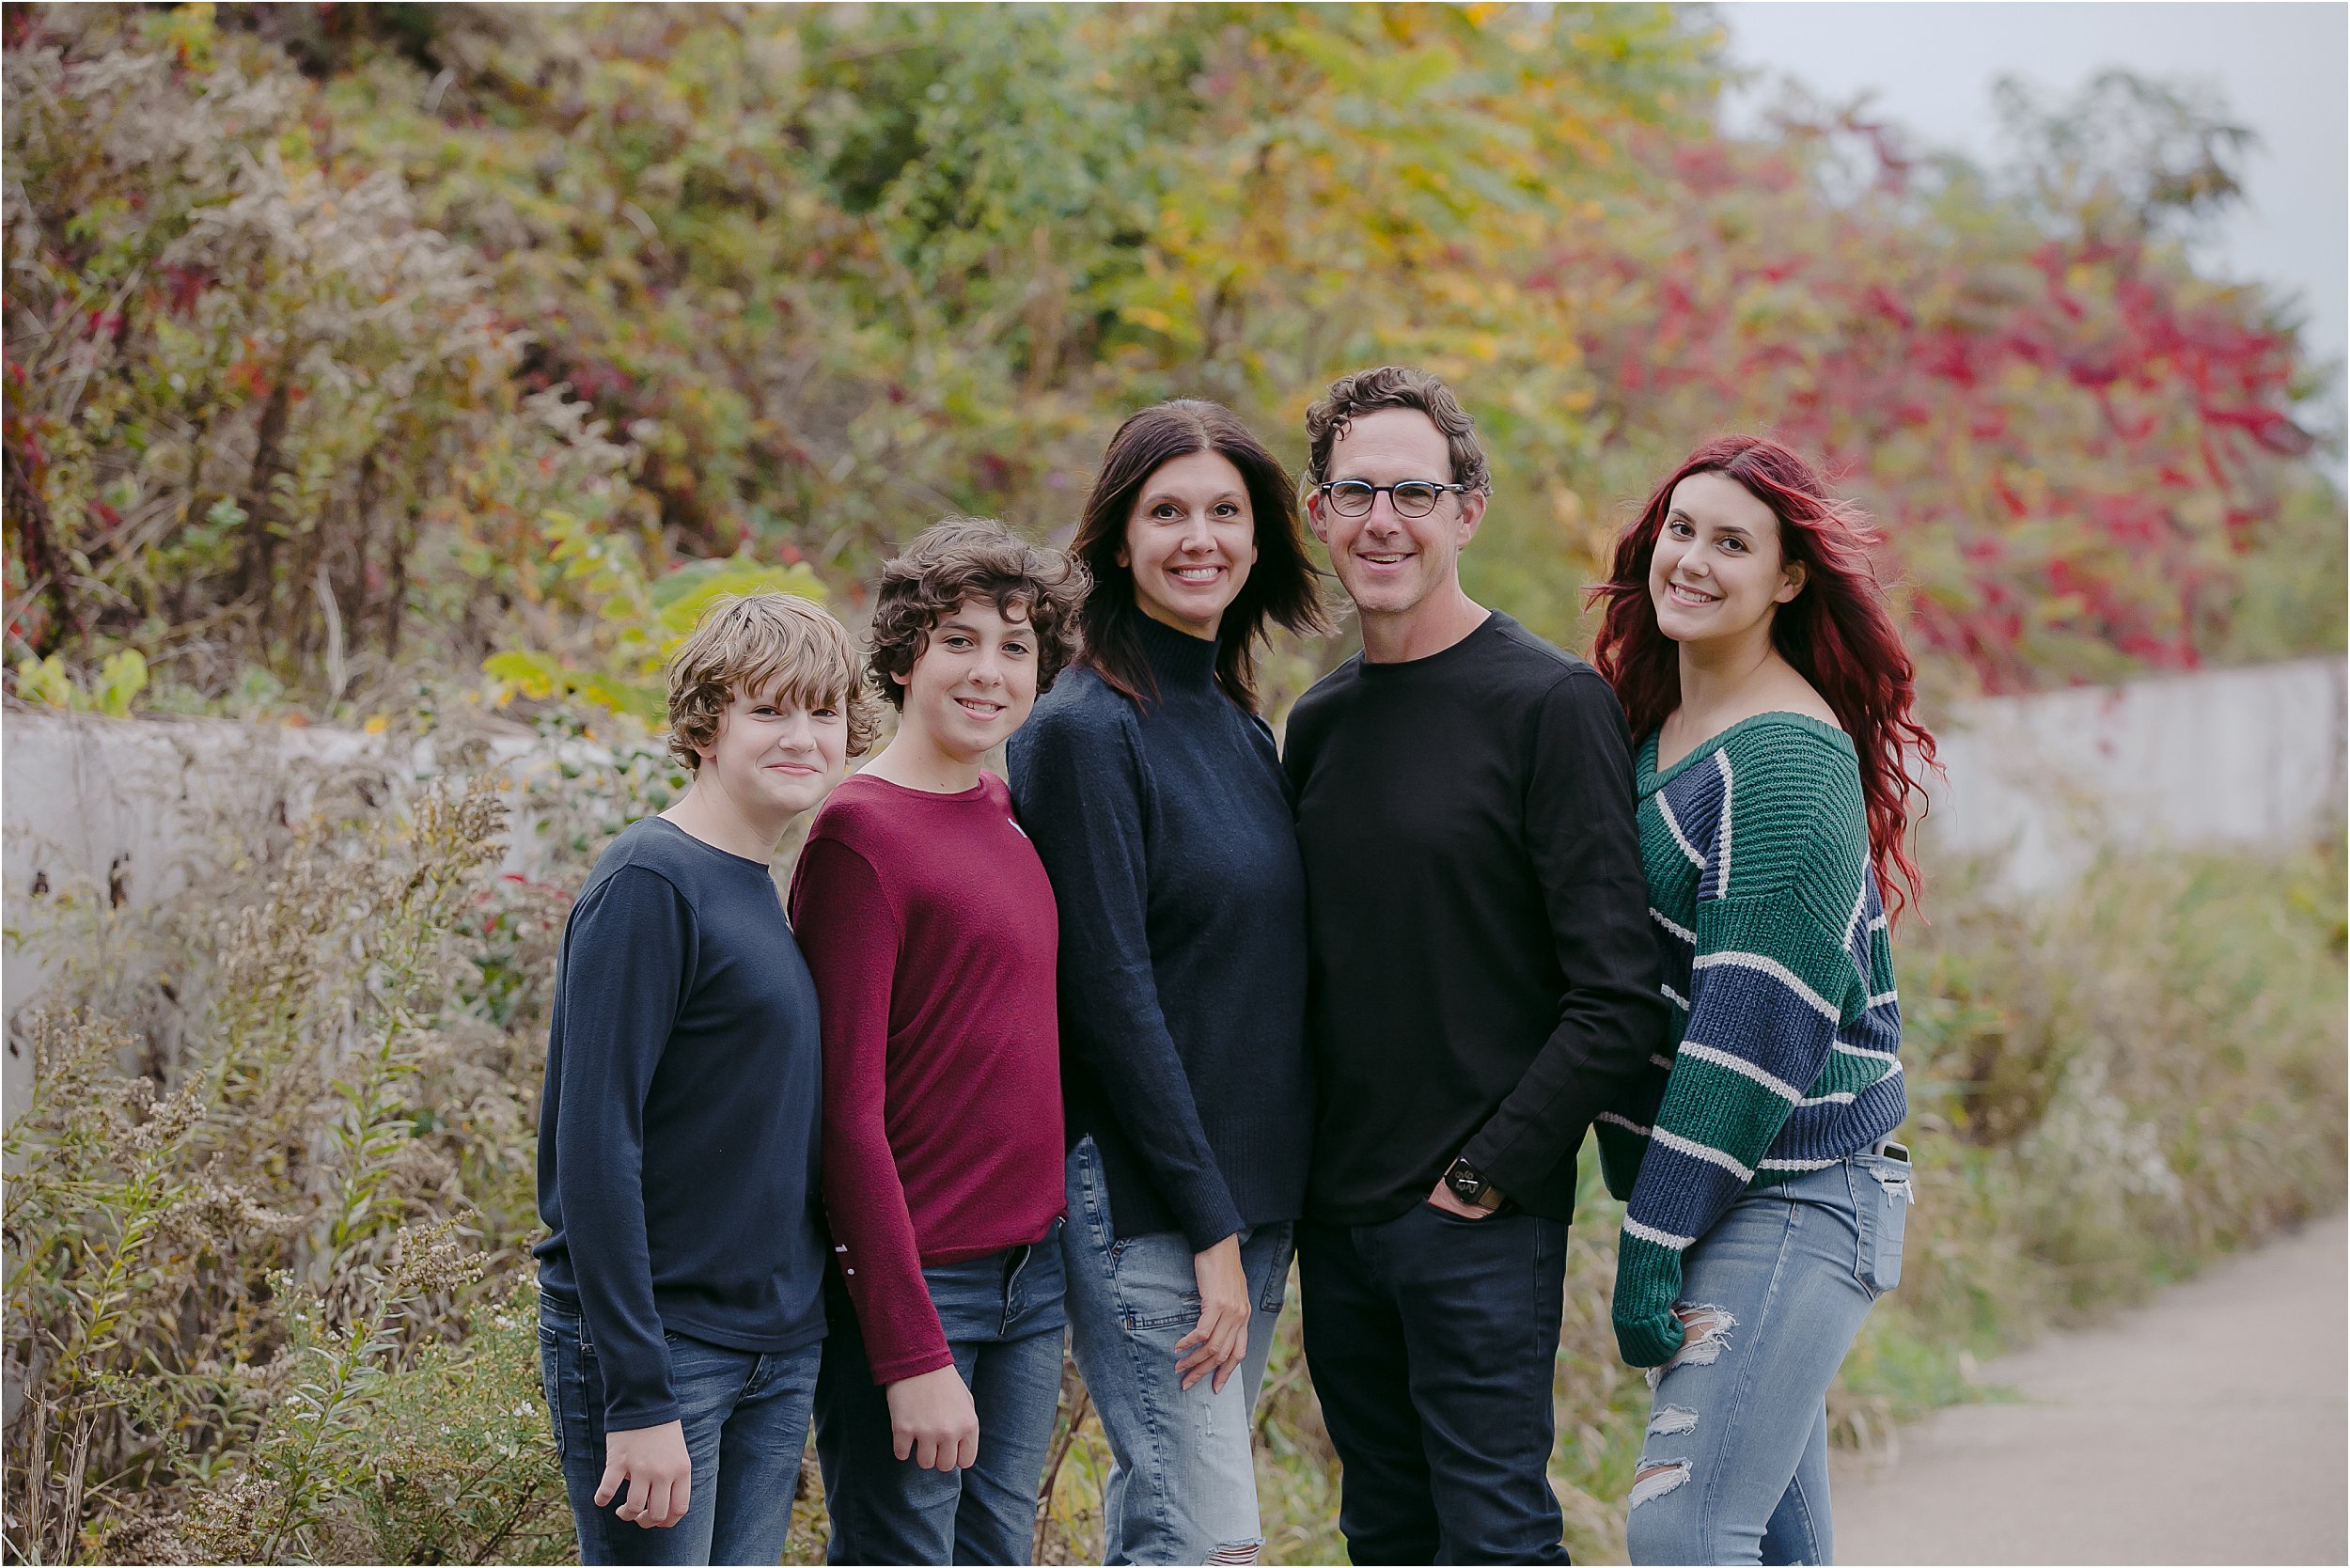 05-mom-dad-brothers-sister-fall-color-overcast.JPG